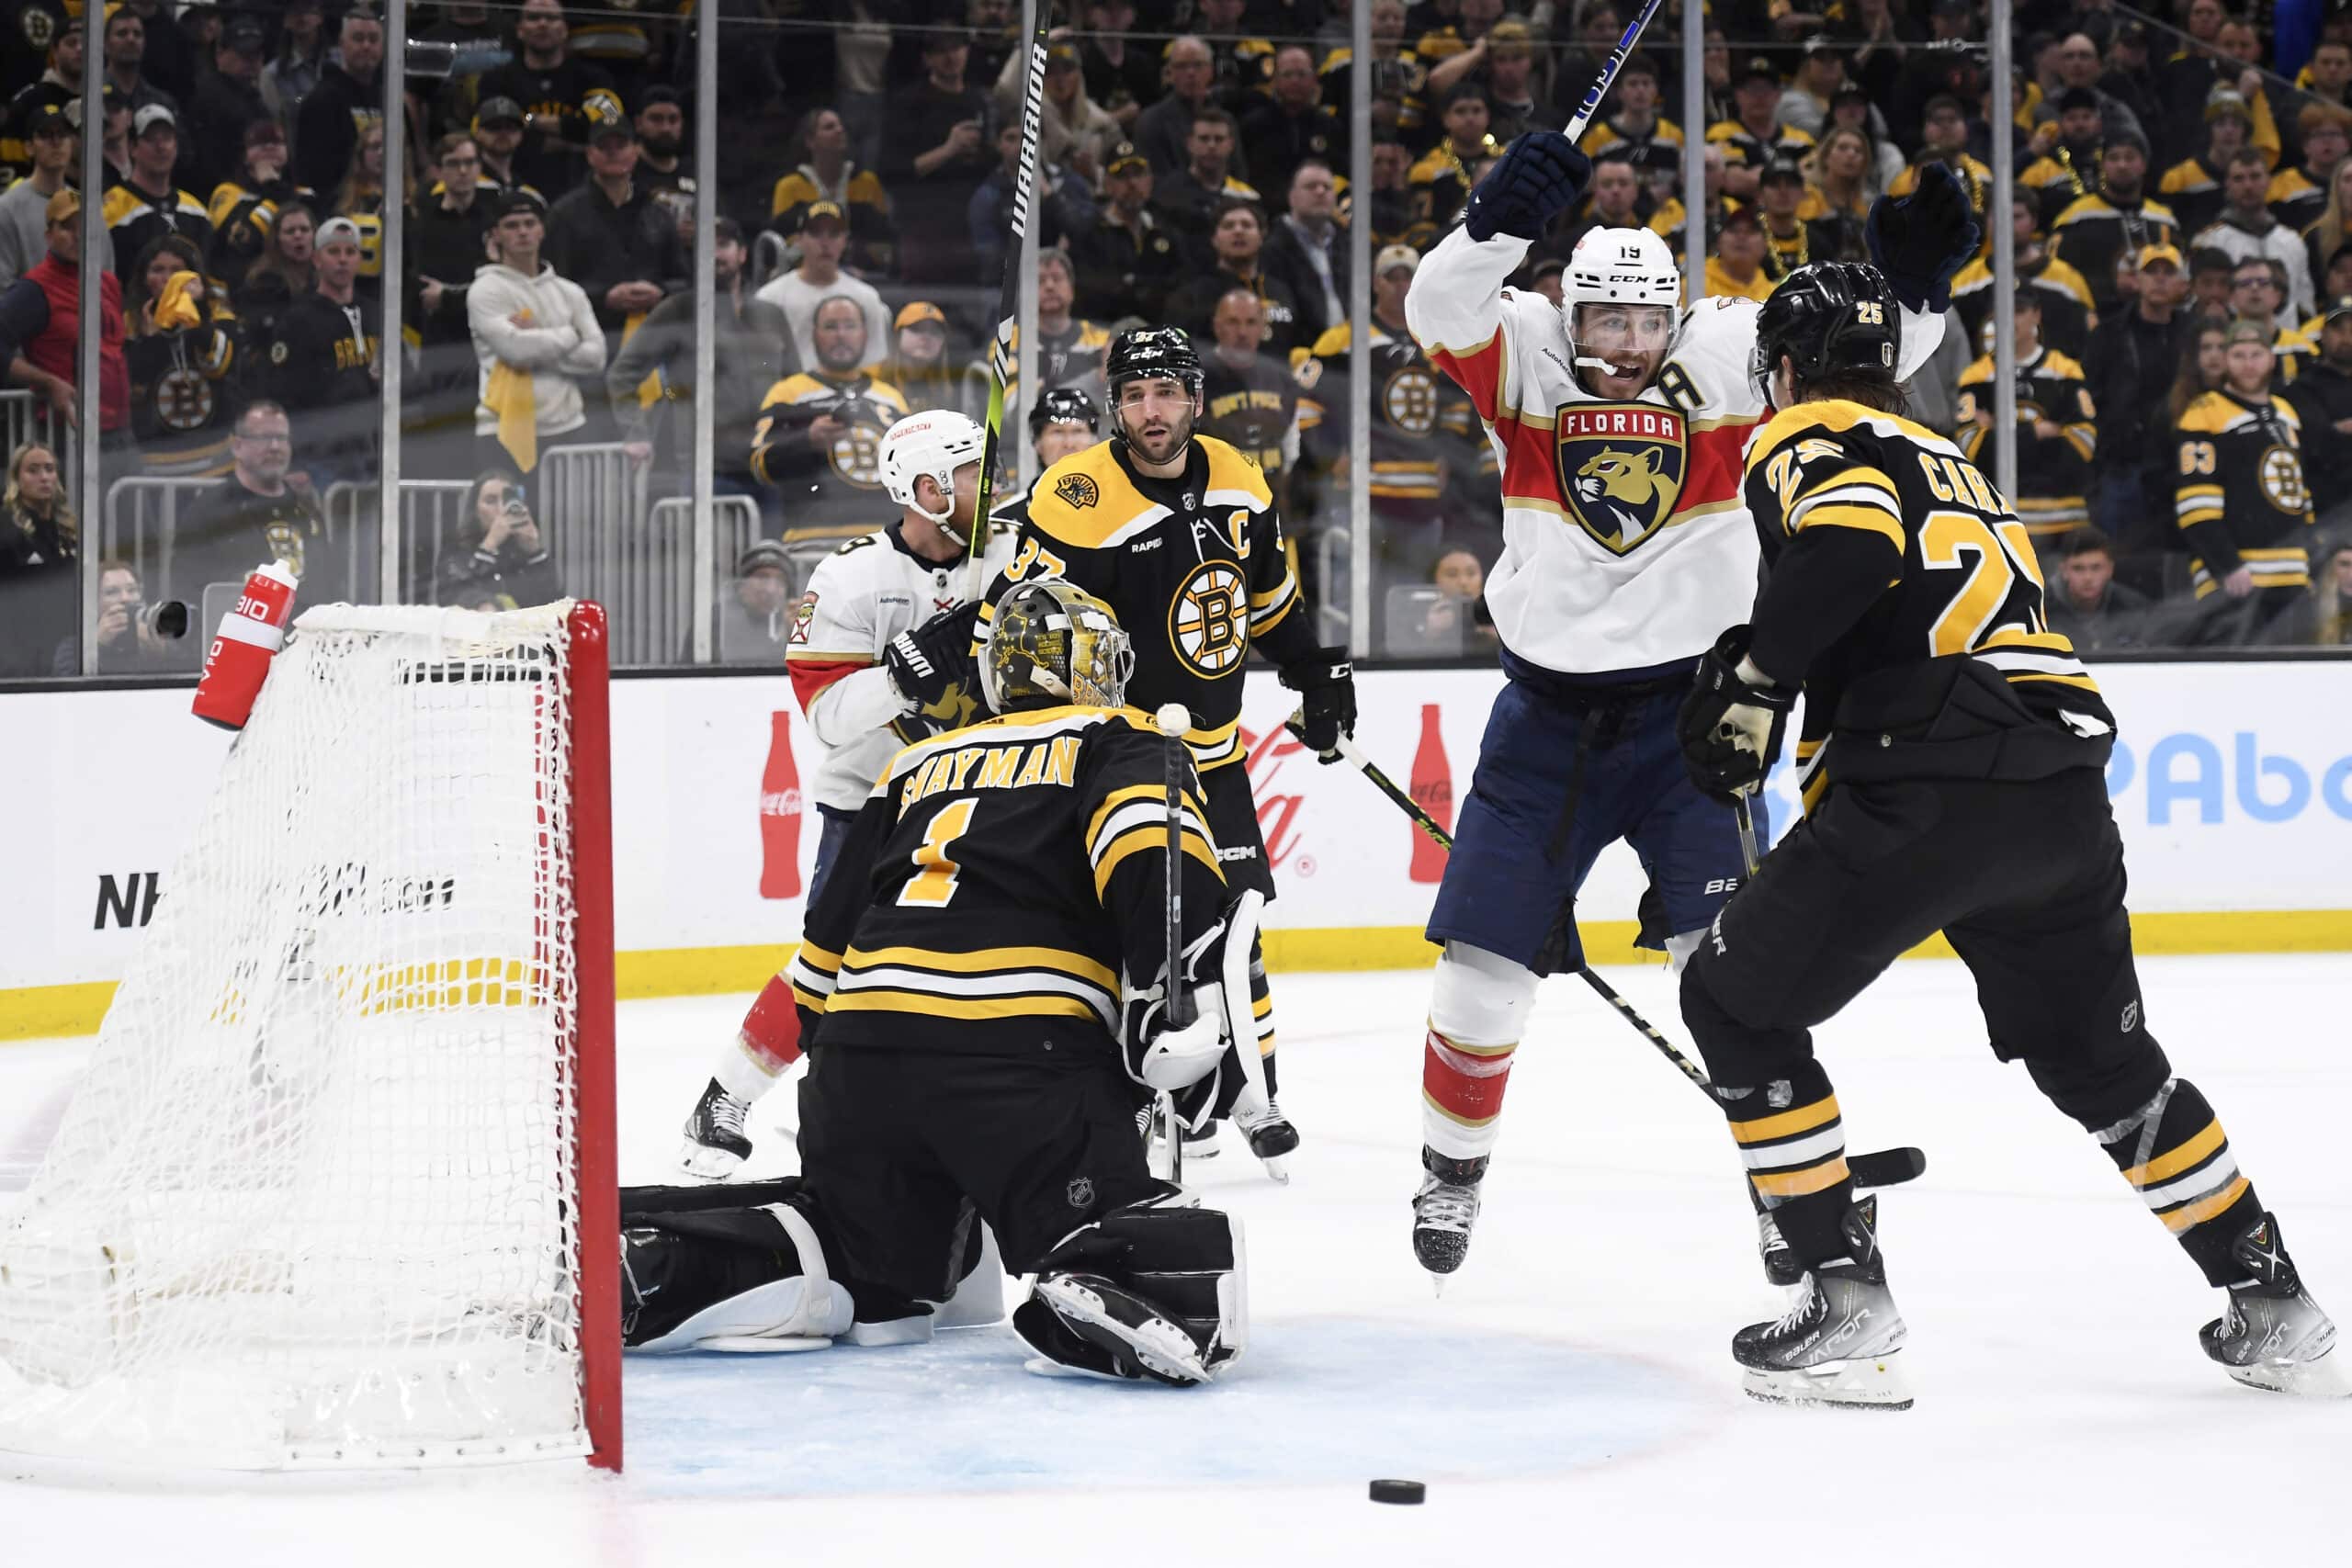 TNT, TBS Smash First-Round Ratings Record for NHL Playoffs